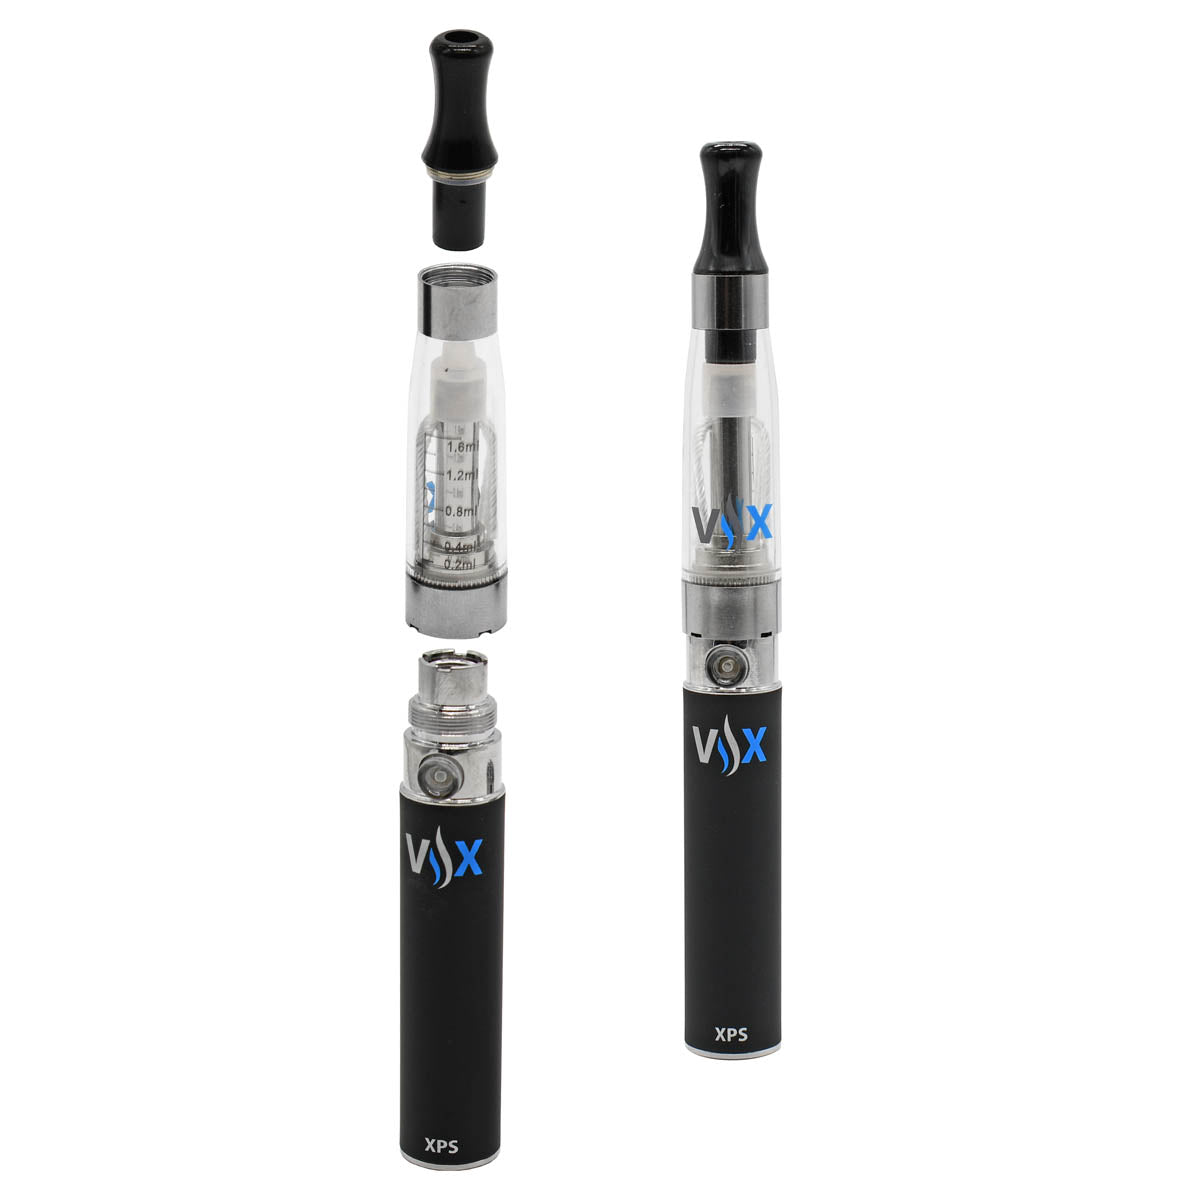 XPS Ego Vape Pen and 510 vape battery with tank disassembled.